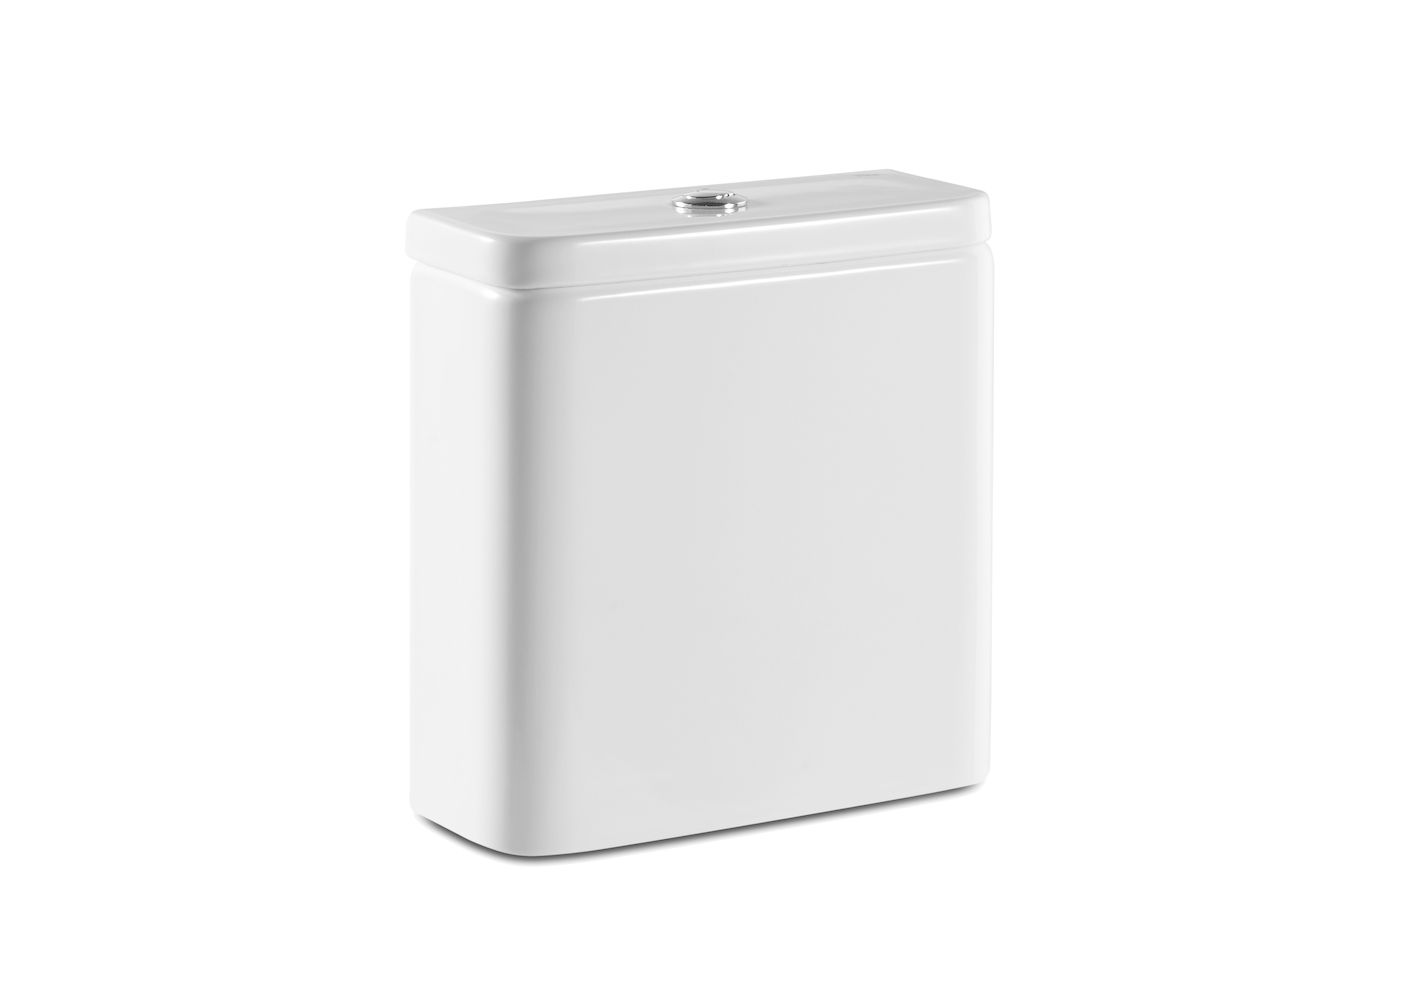 Dual flush 4/2L WC cistern with bottom inlet for compact back to wall Rimless toilet- WHITE